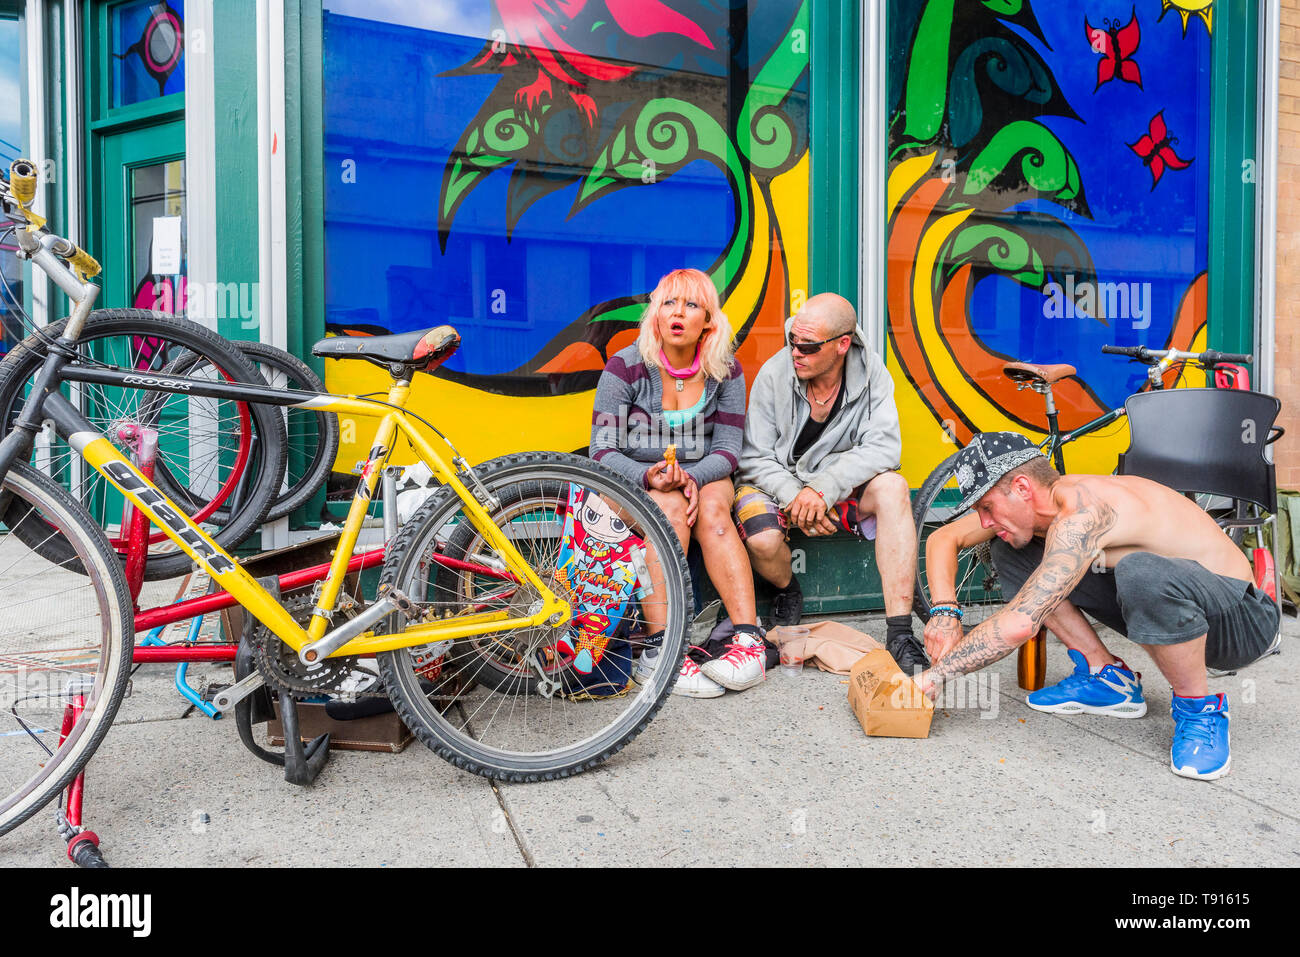 Colourful window and street people, Hastings St, DTES, Vancouver, British Columbia, Canada. Stock Photo